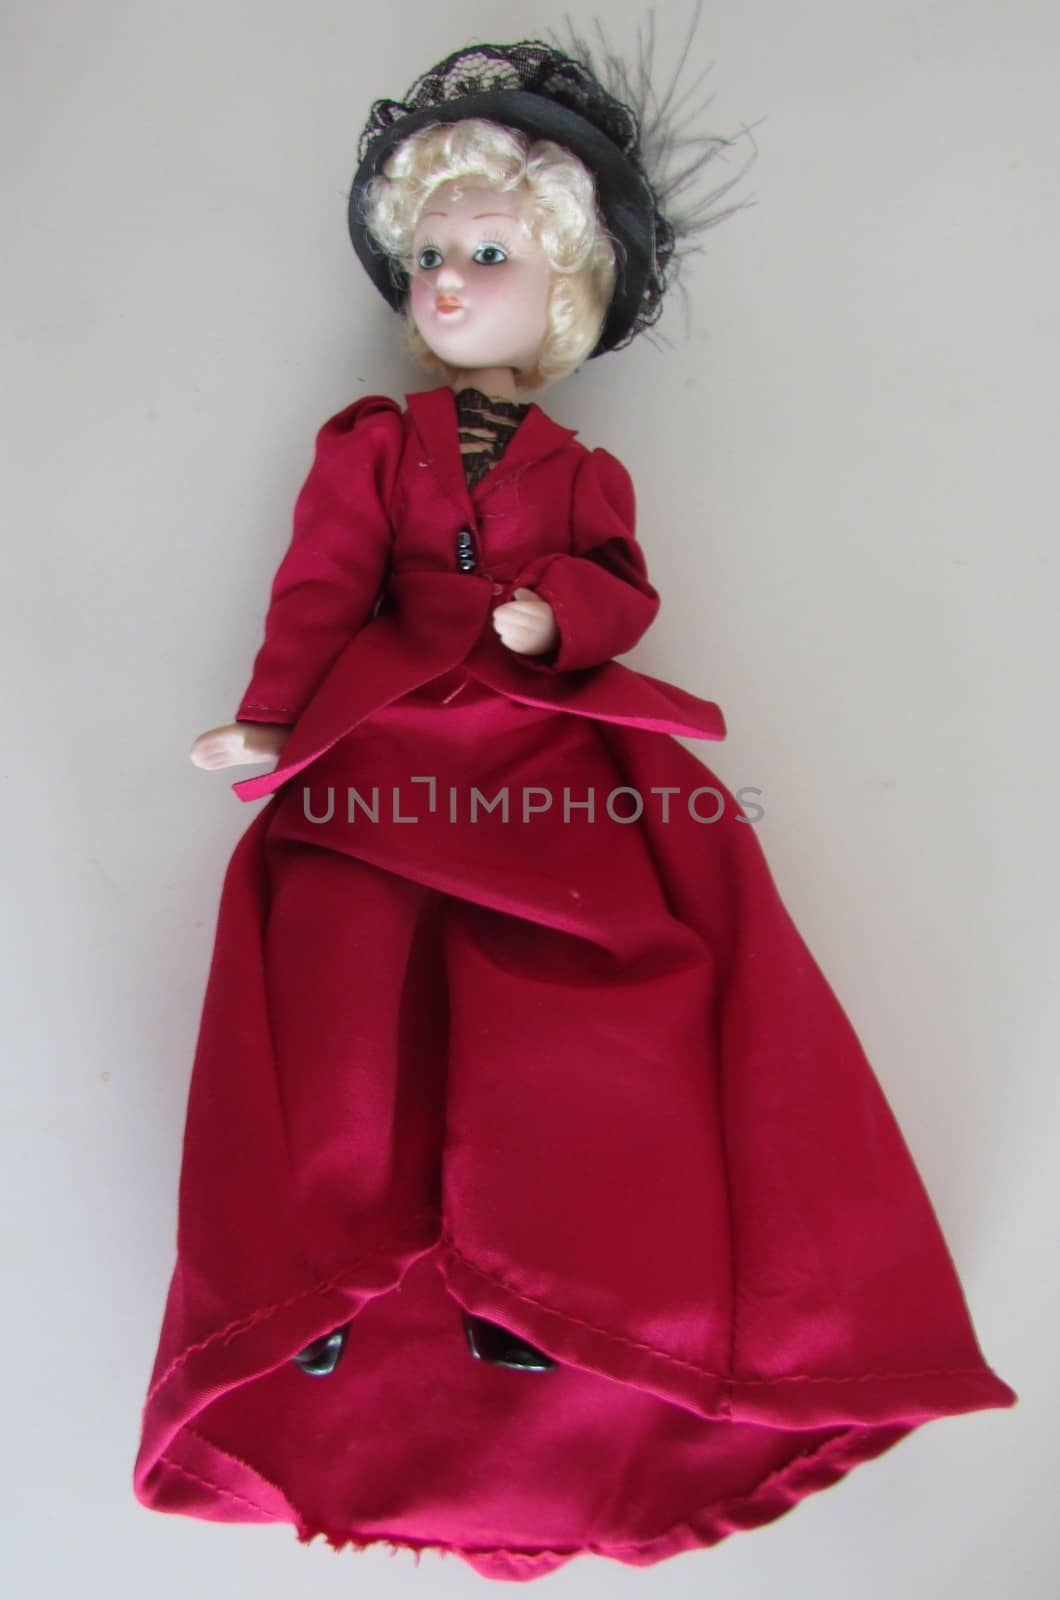 little doll in national costume